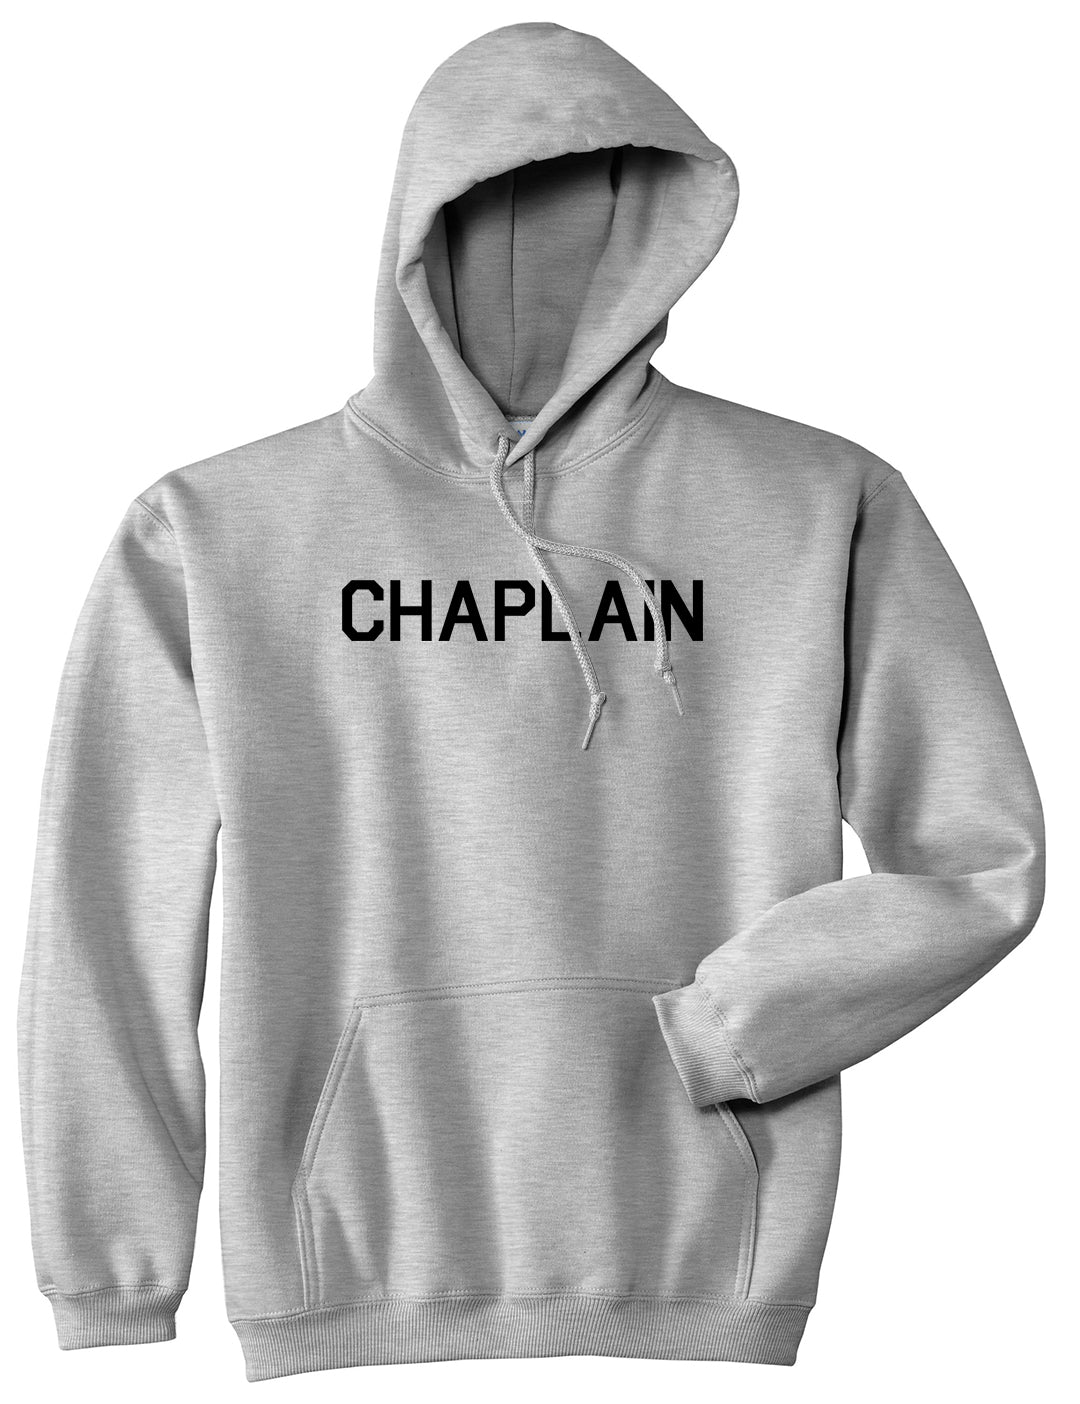 Christian Chaplain Grey Pullover Hoodie by Kings Of NY